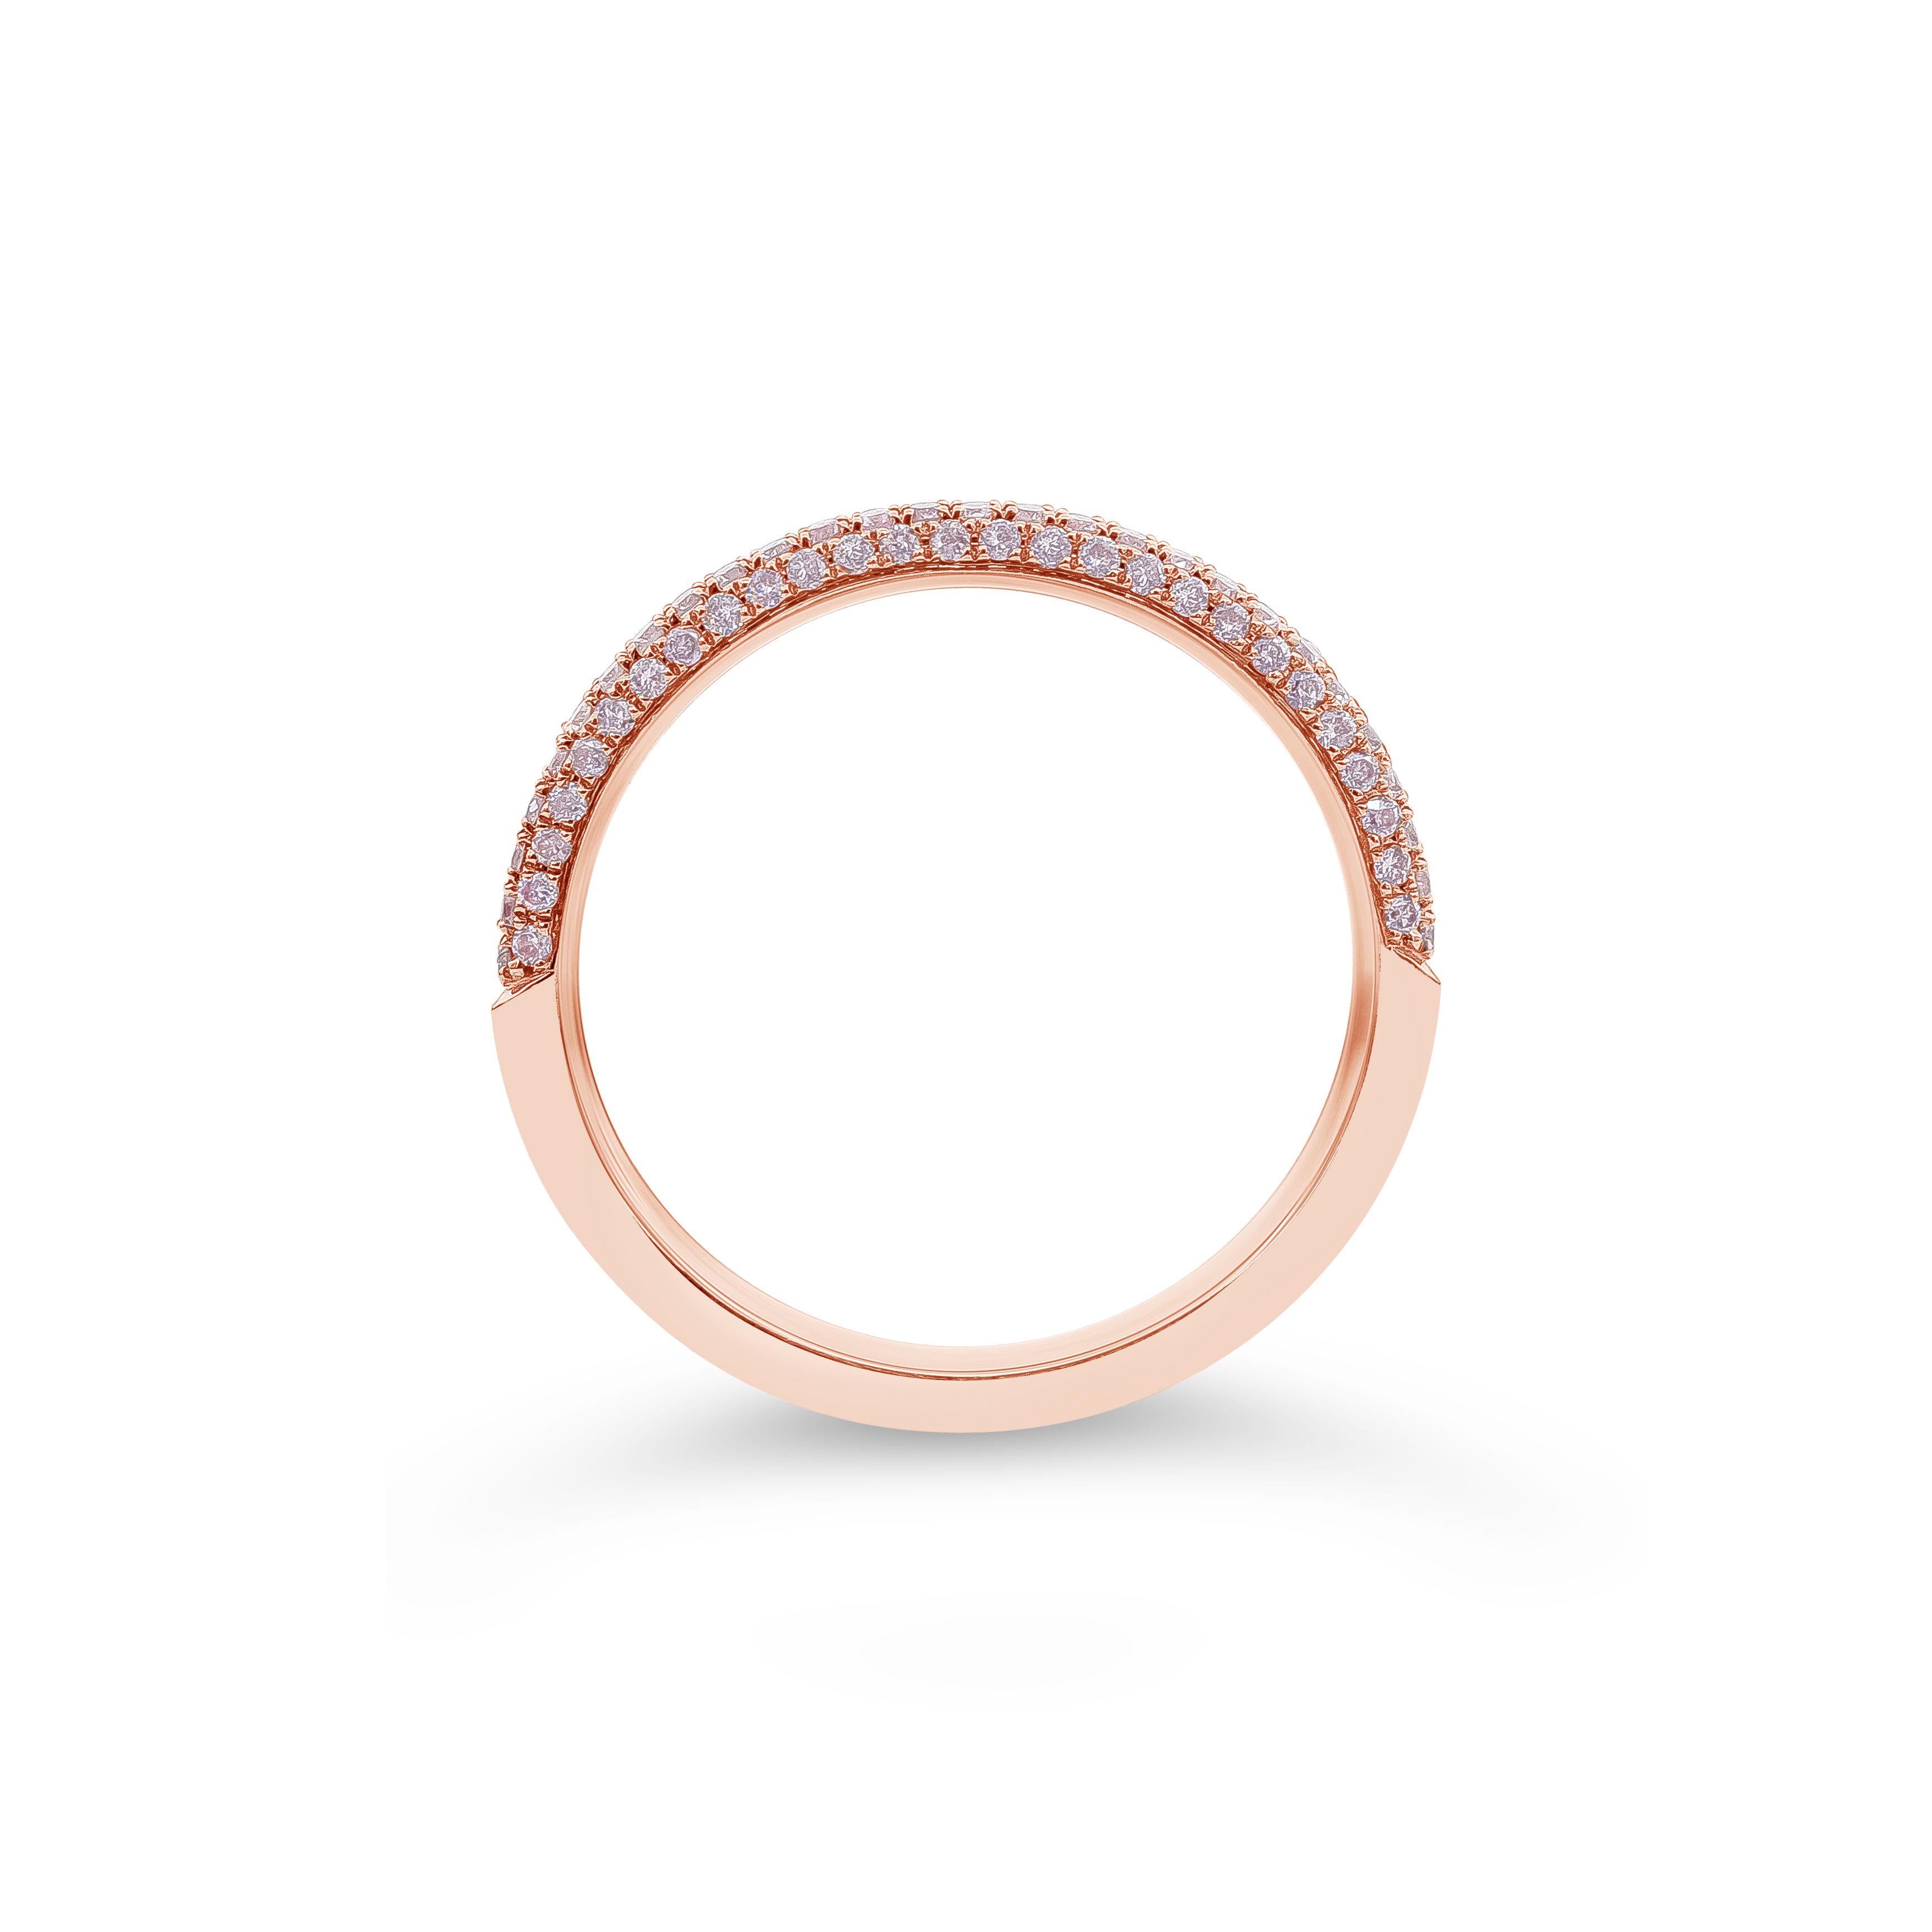 This wedding band has a rounded design micro-pave set halfway with round brilliant pink diamonds weighing 0.30 carats total. Made in 18k rose gold. Size 6.25 US (sizable upon request).

Style available in different price ranges. Prices are based on